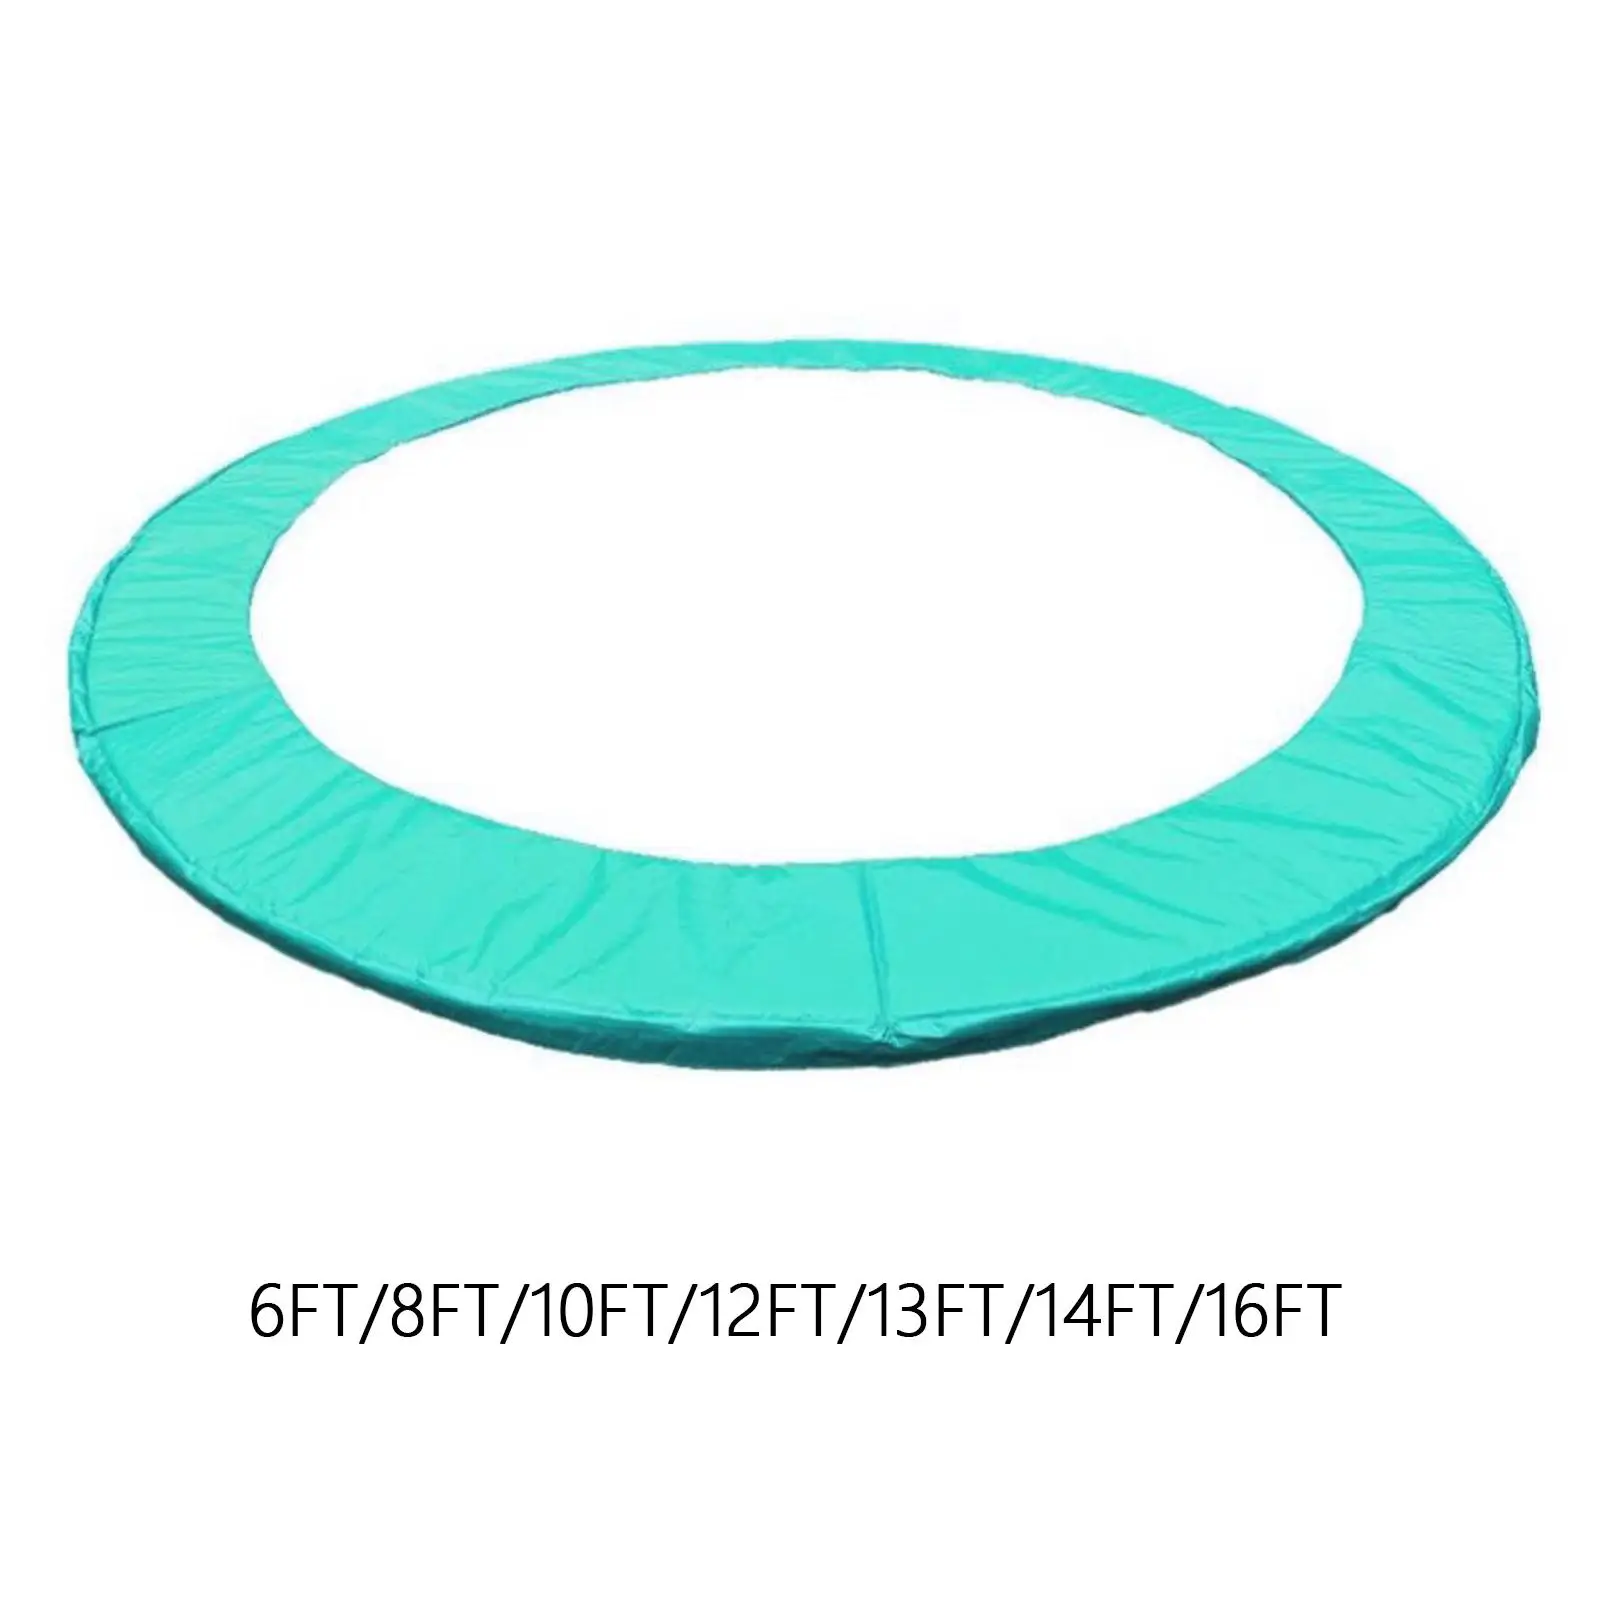 Trampoline Protection Mat Replacement Trampoline Safety Mats Spring Protection Cover for Round Trampoline Frames Accessories